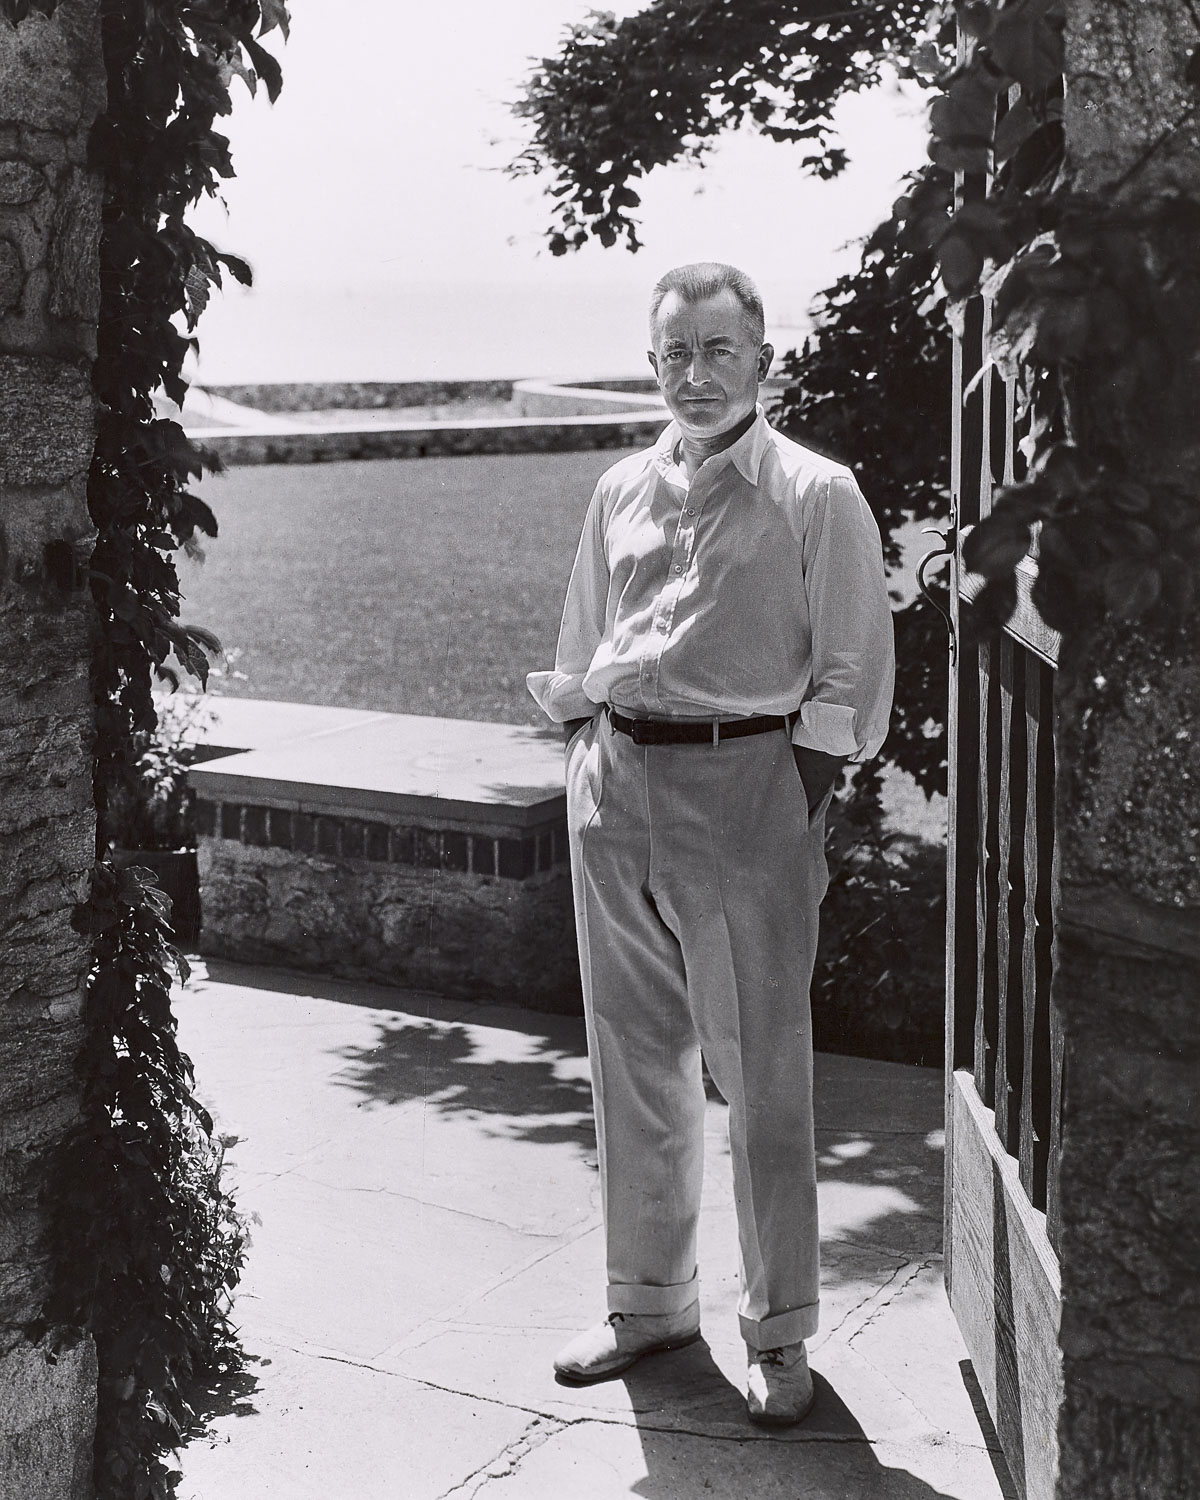 Full-length portrait of a man standing next to an open gate. Foliage is visible on the left side; there is a low stone wall directly behind him and a grassy field beyond. The man looks directly at the camera with a calm attitude, his hands in his pockets. He is wearing a white open collared shirt and light-colored cuffed pants.